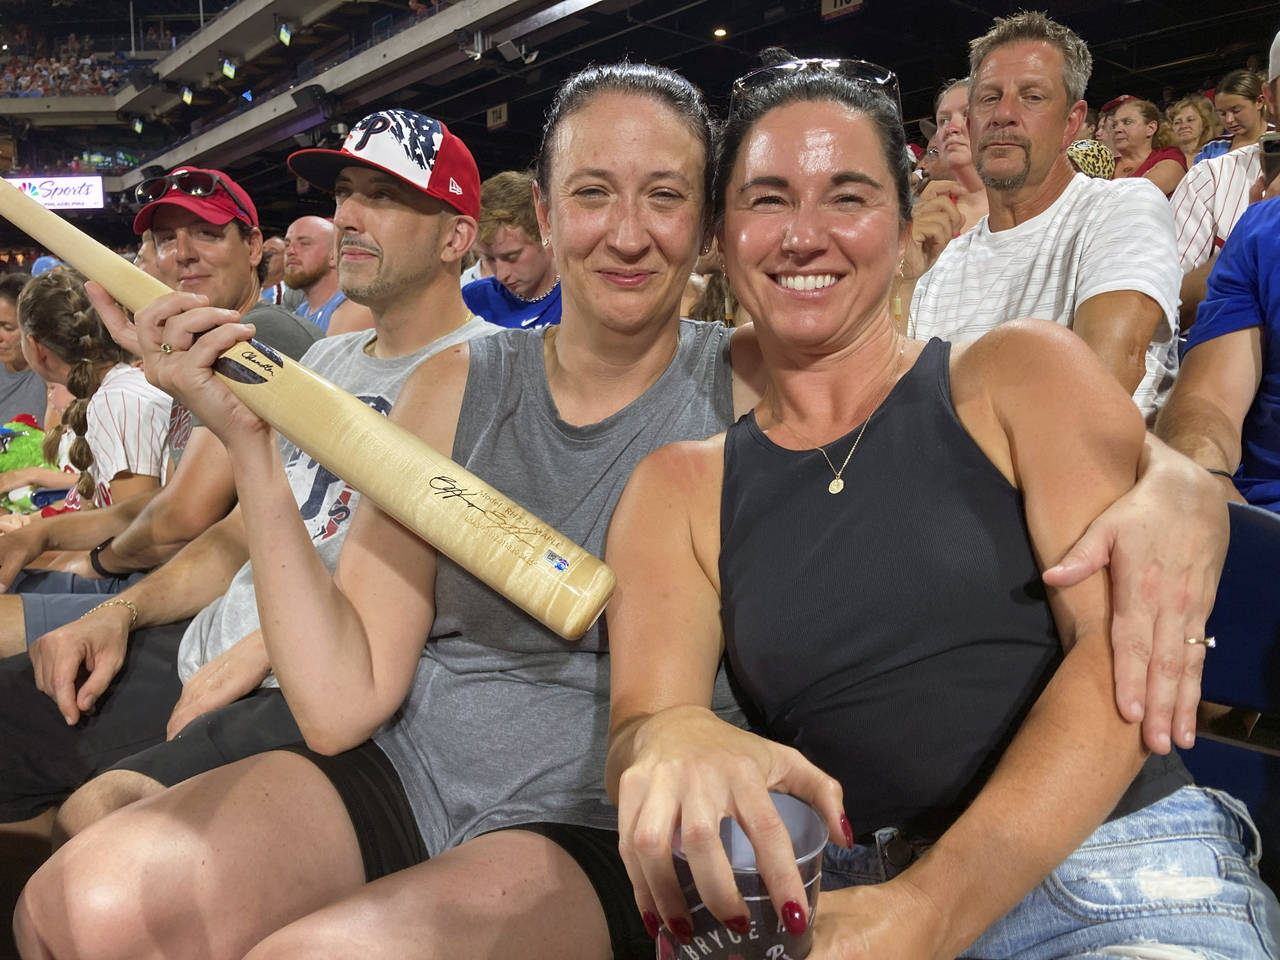 Kathie Koller, left, and Jen Mehall pose for a photo with a bat during a baseball game between the ...